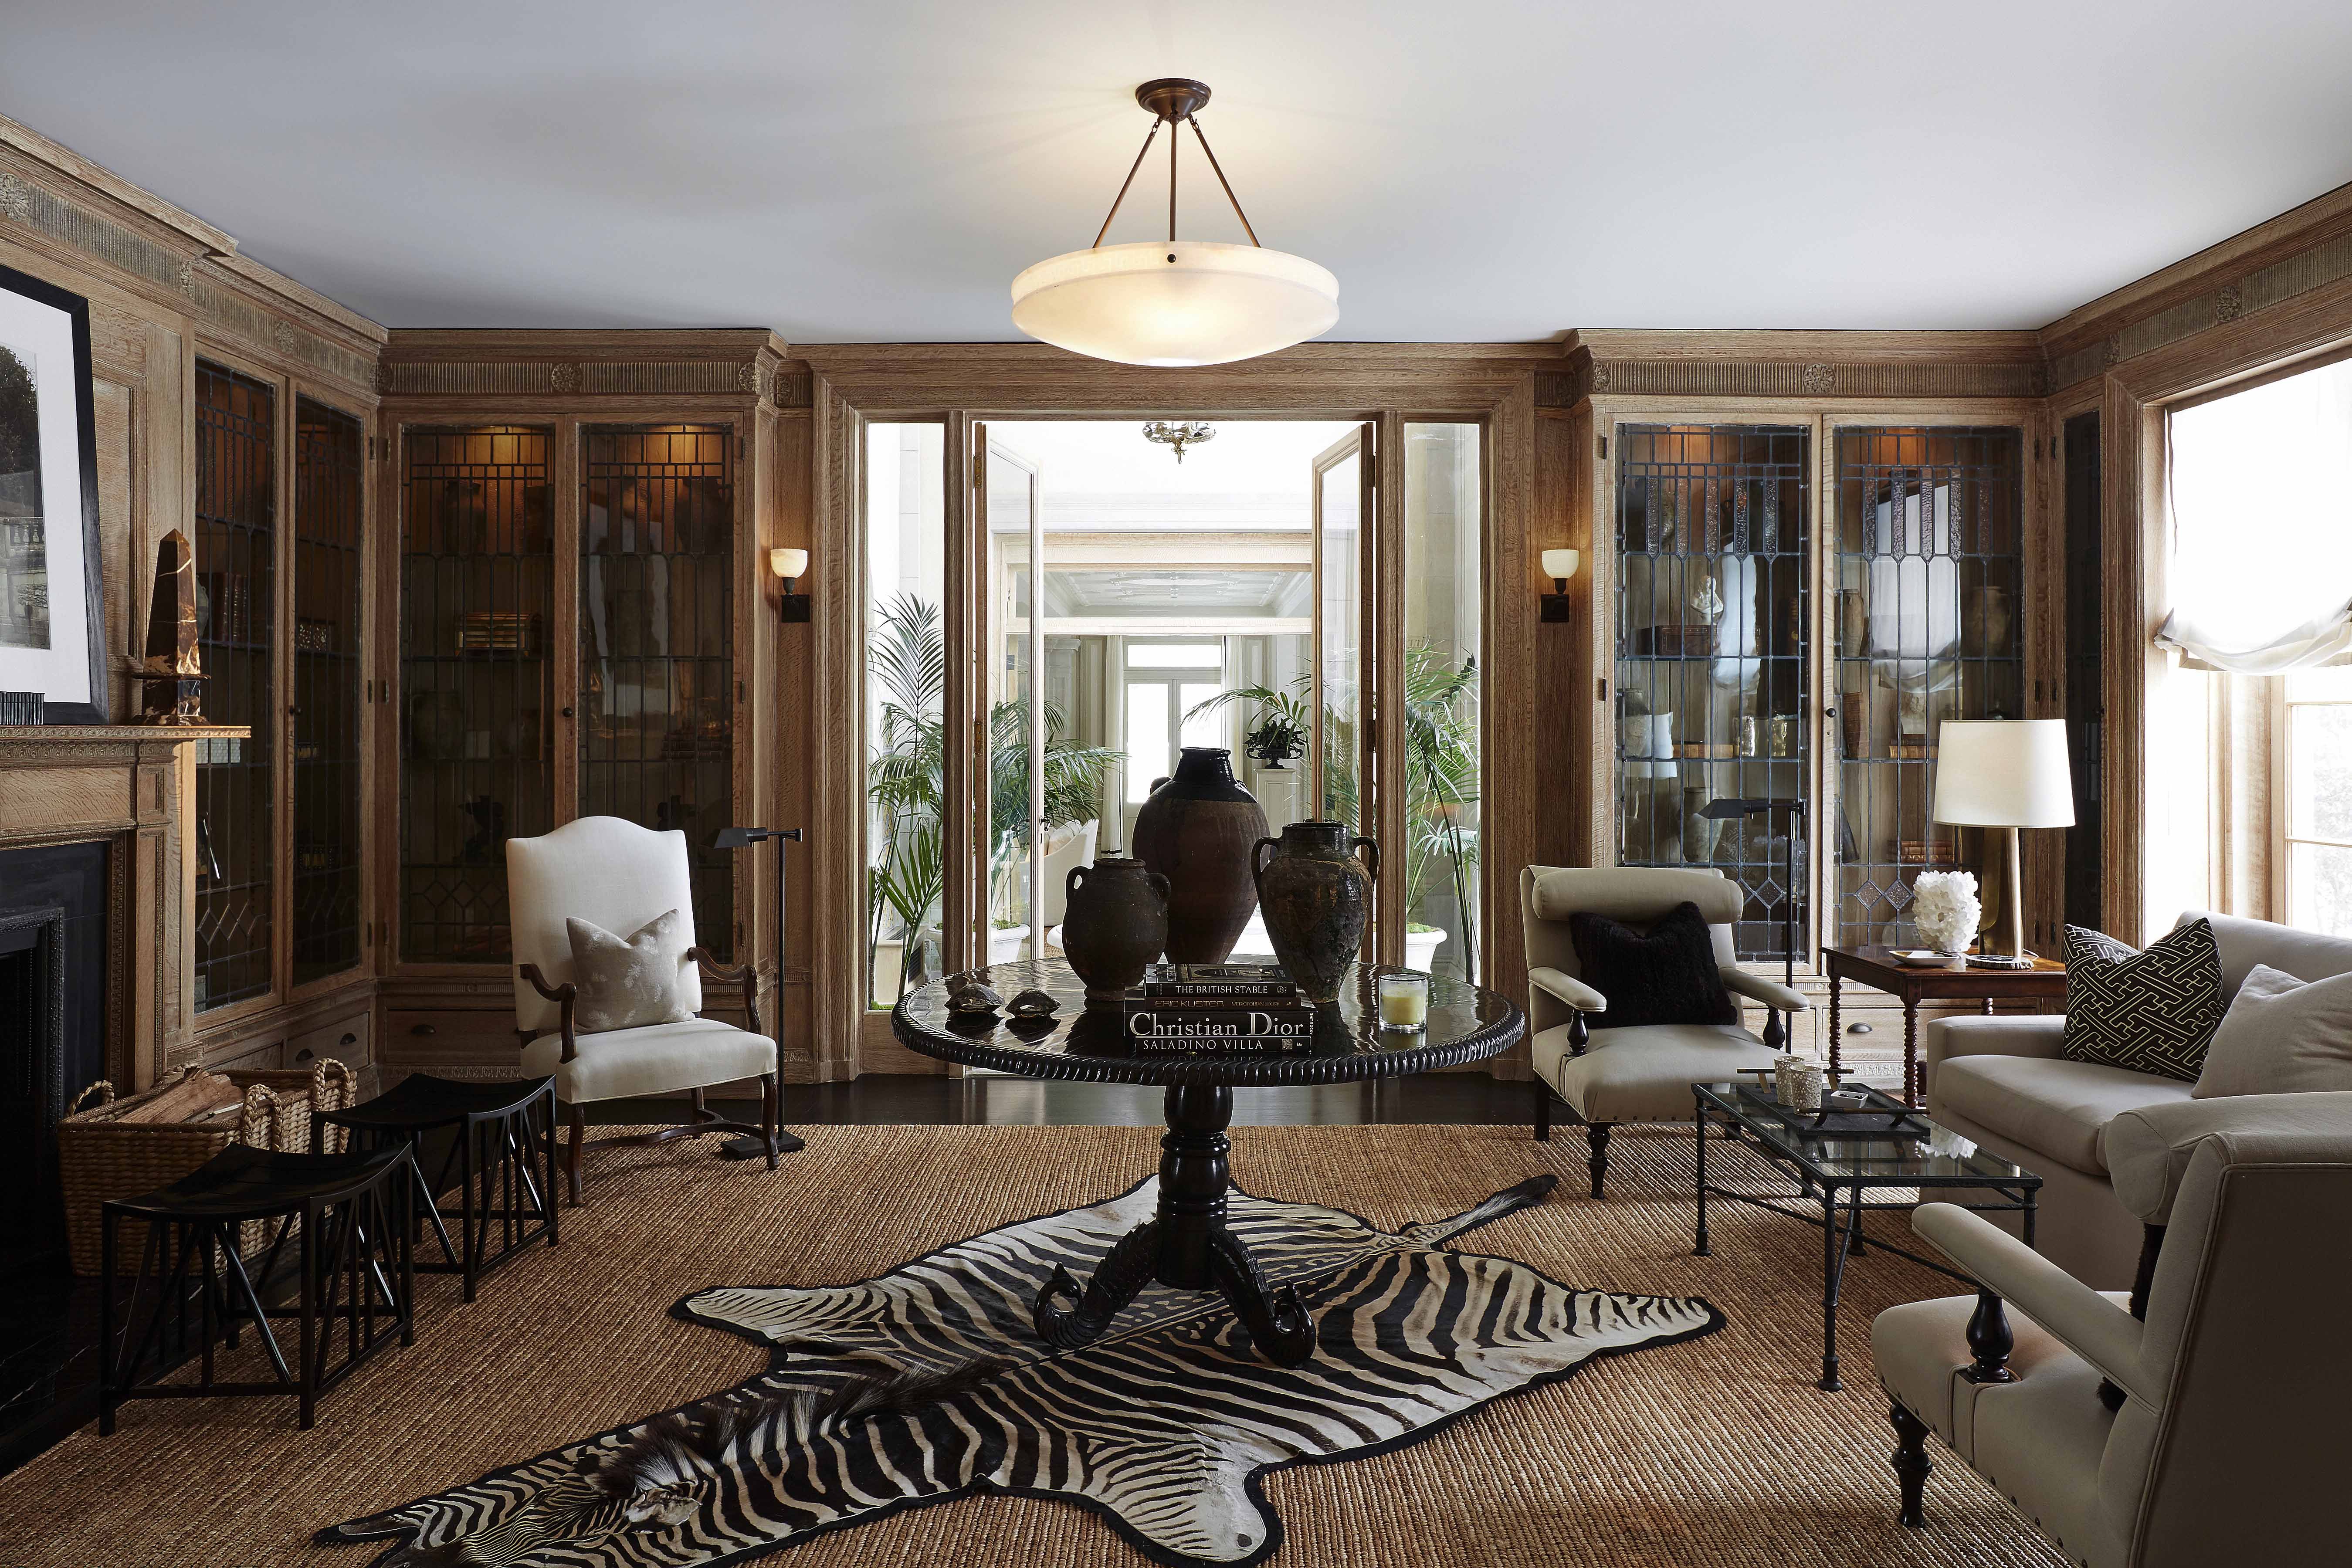 See How Vince Camuto Restored His Jazz Age Manor in the Hamptons   Beautiful living rooms, Hamptons interior design, Hamptons interior